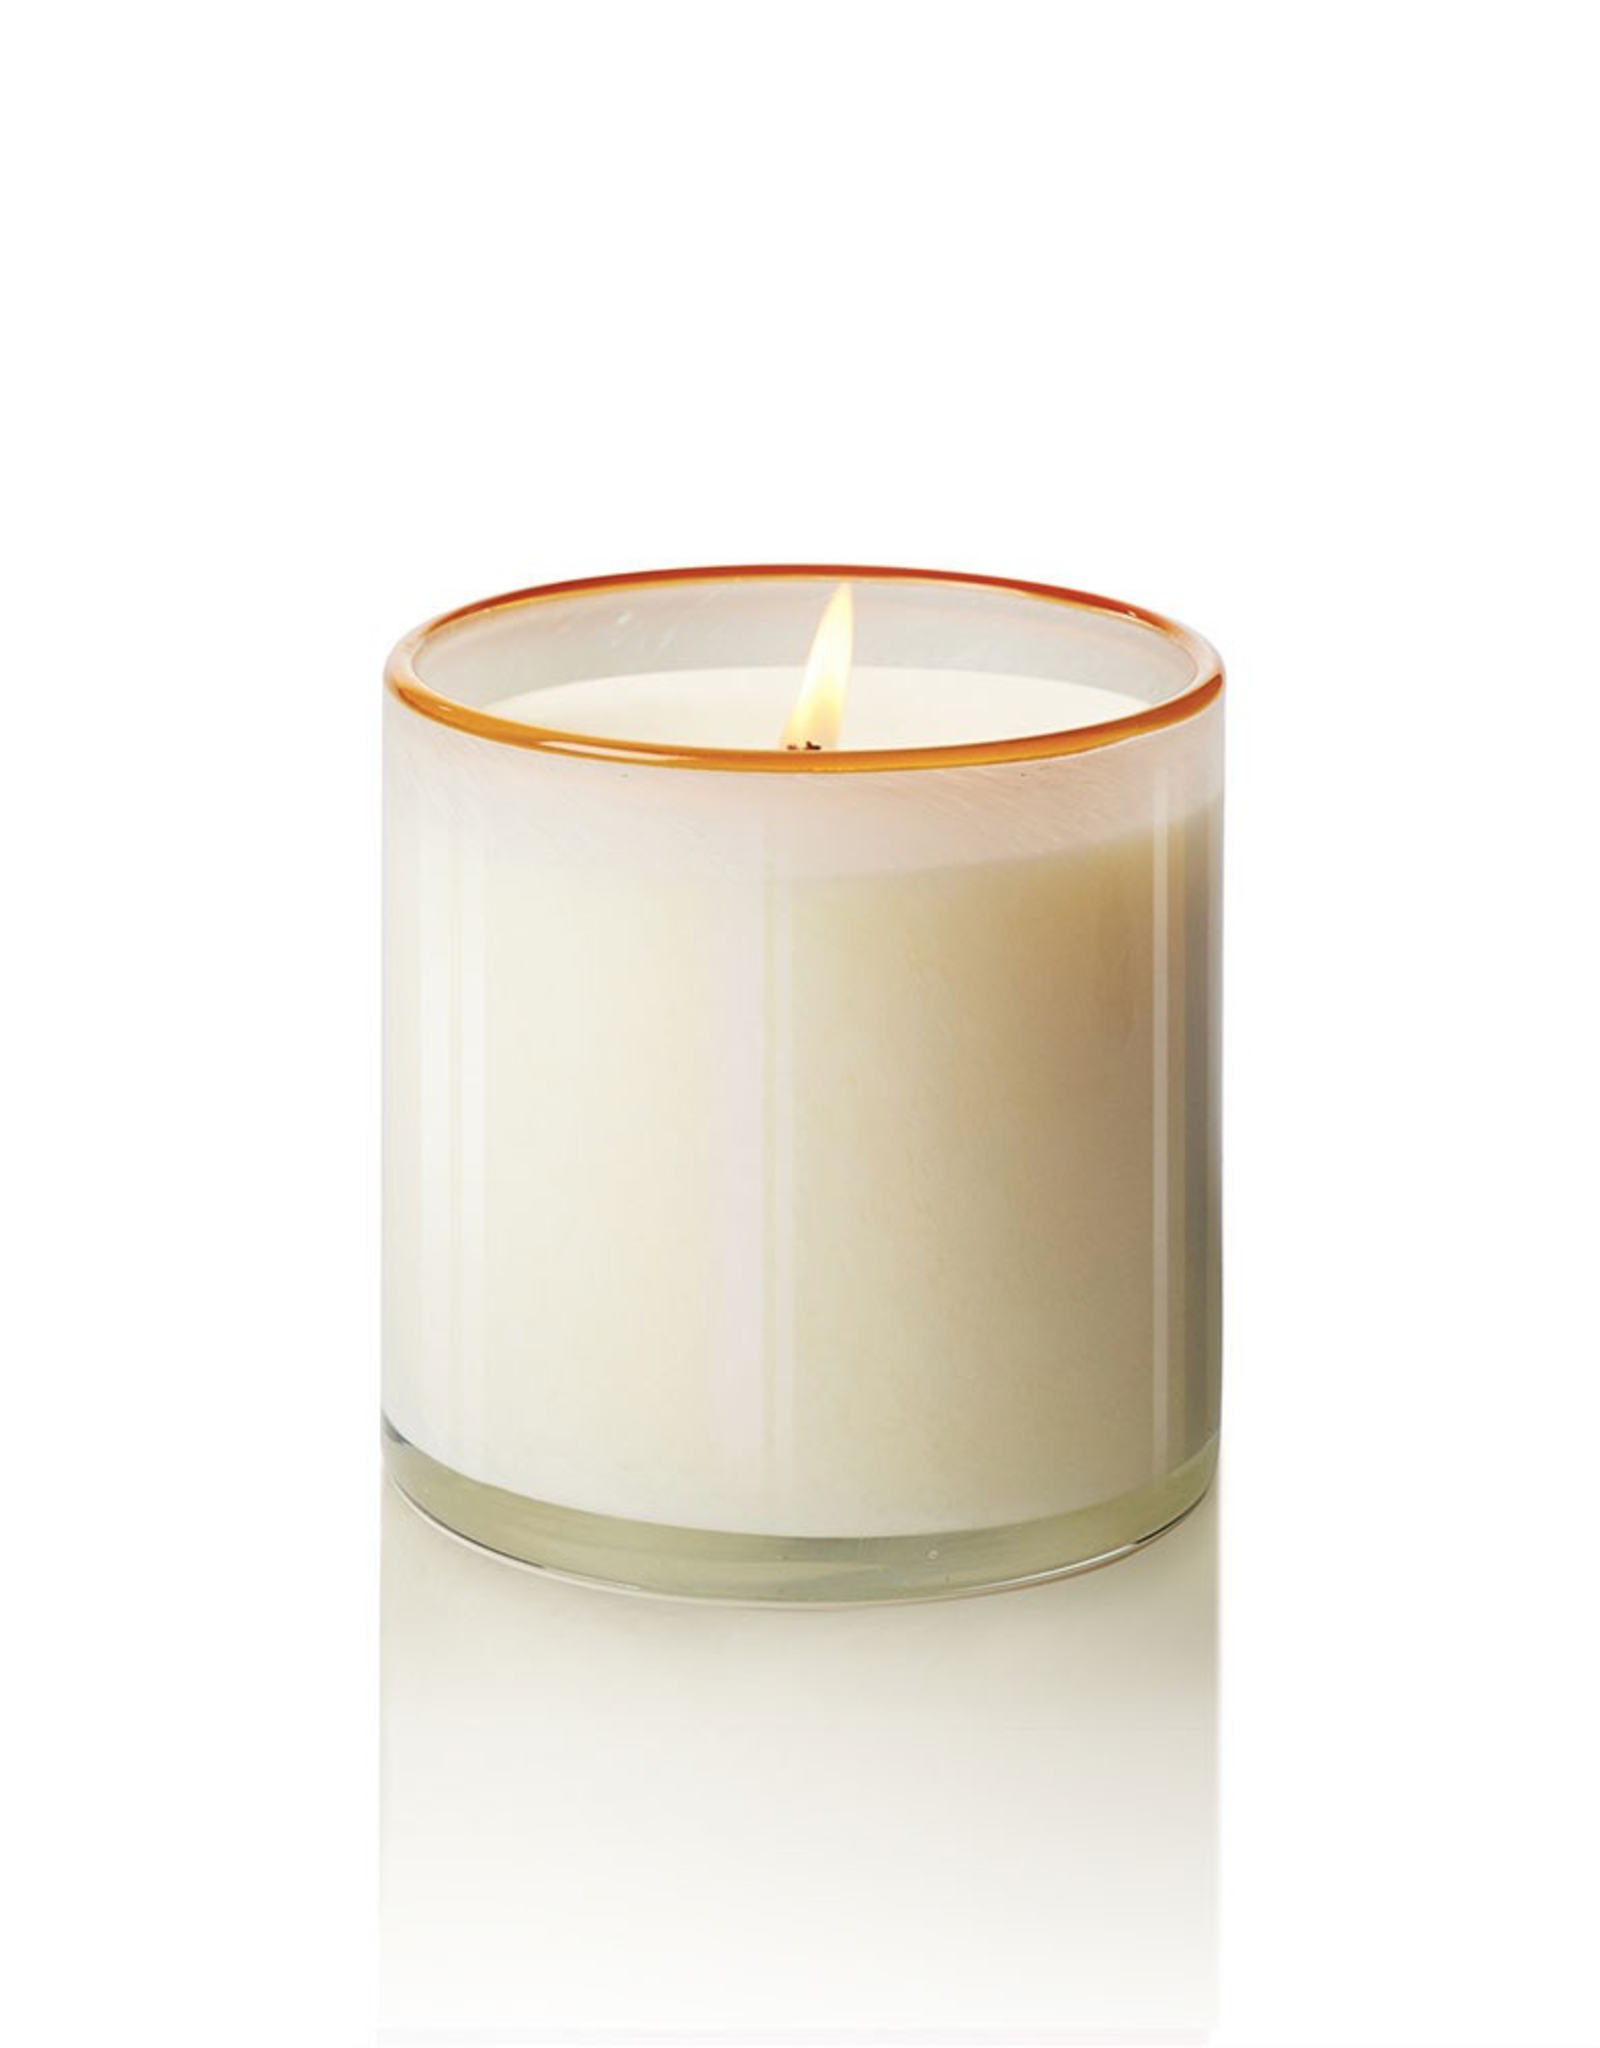 Honey Blossom Great Room Lafco Candle